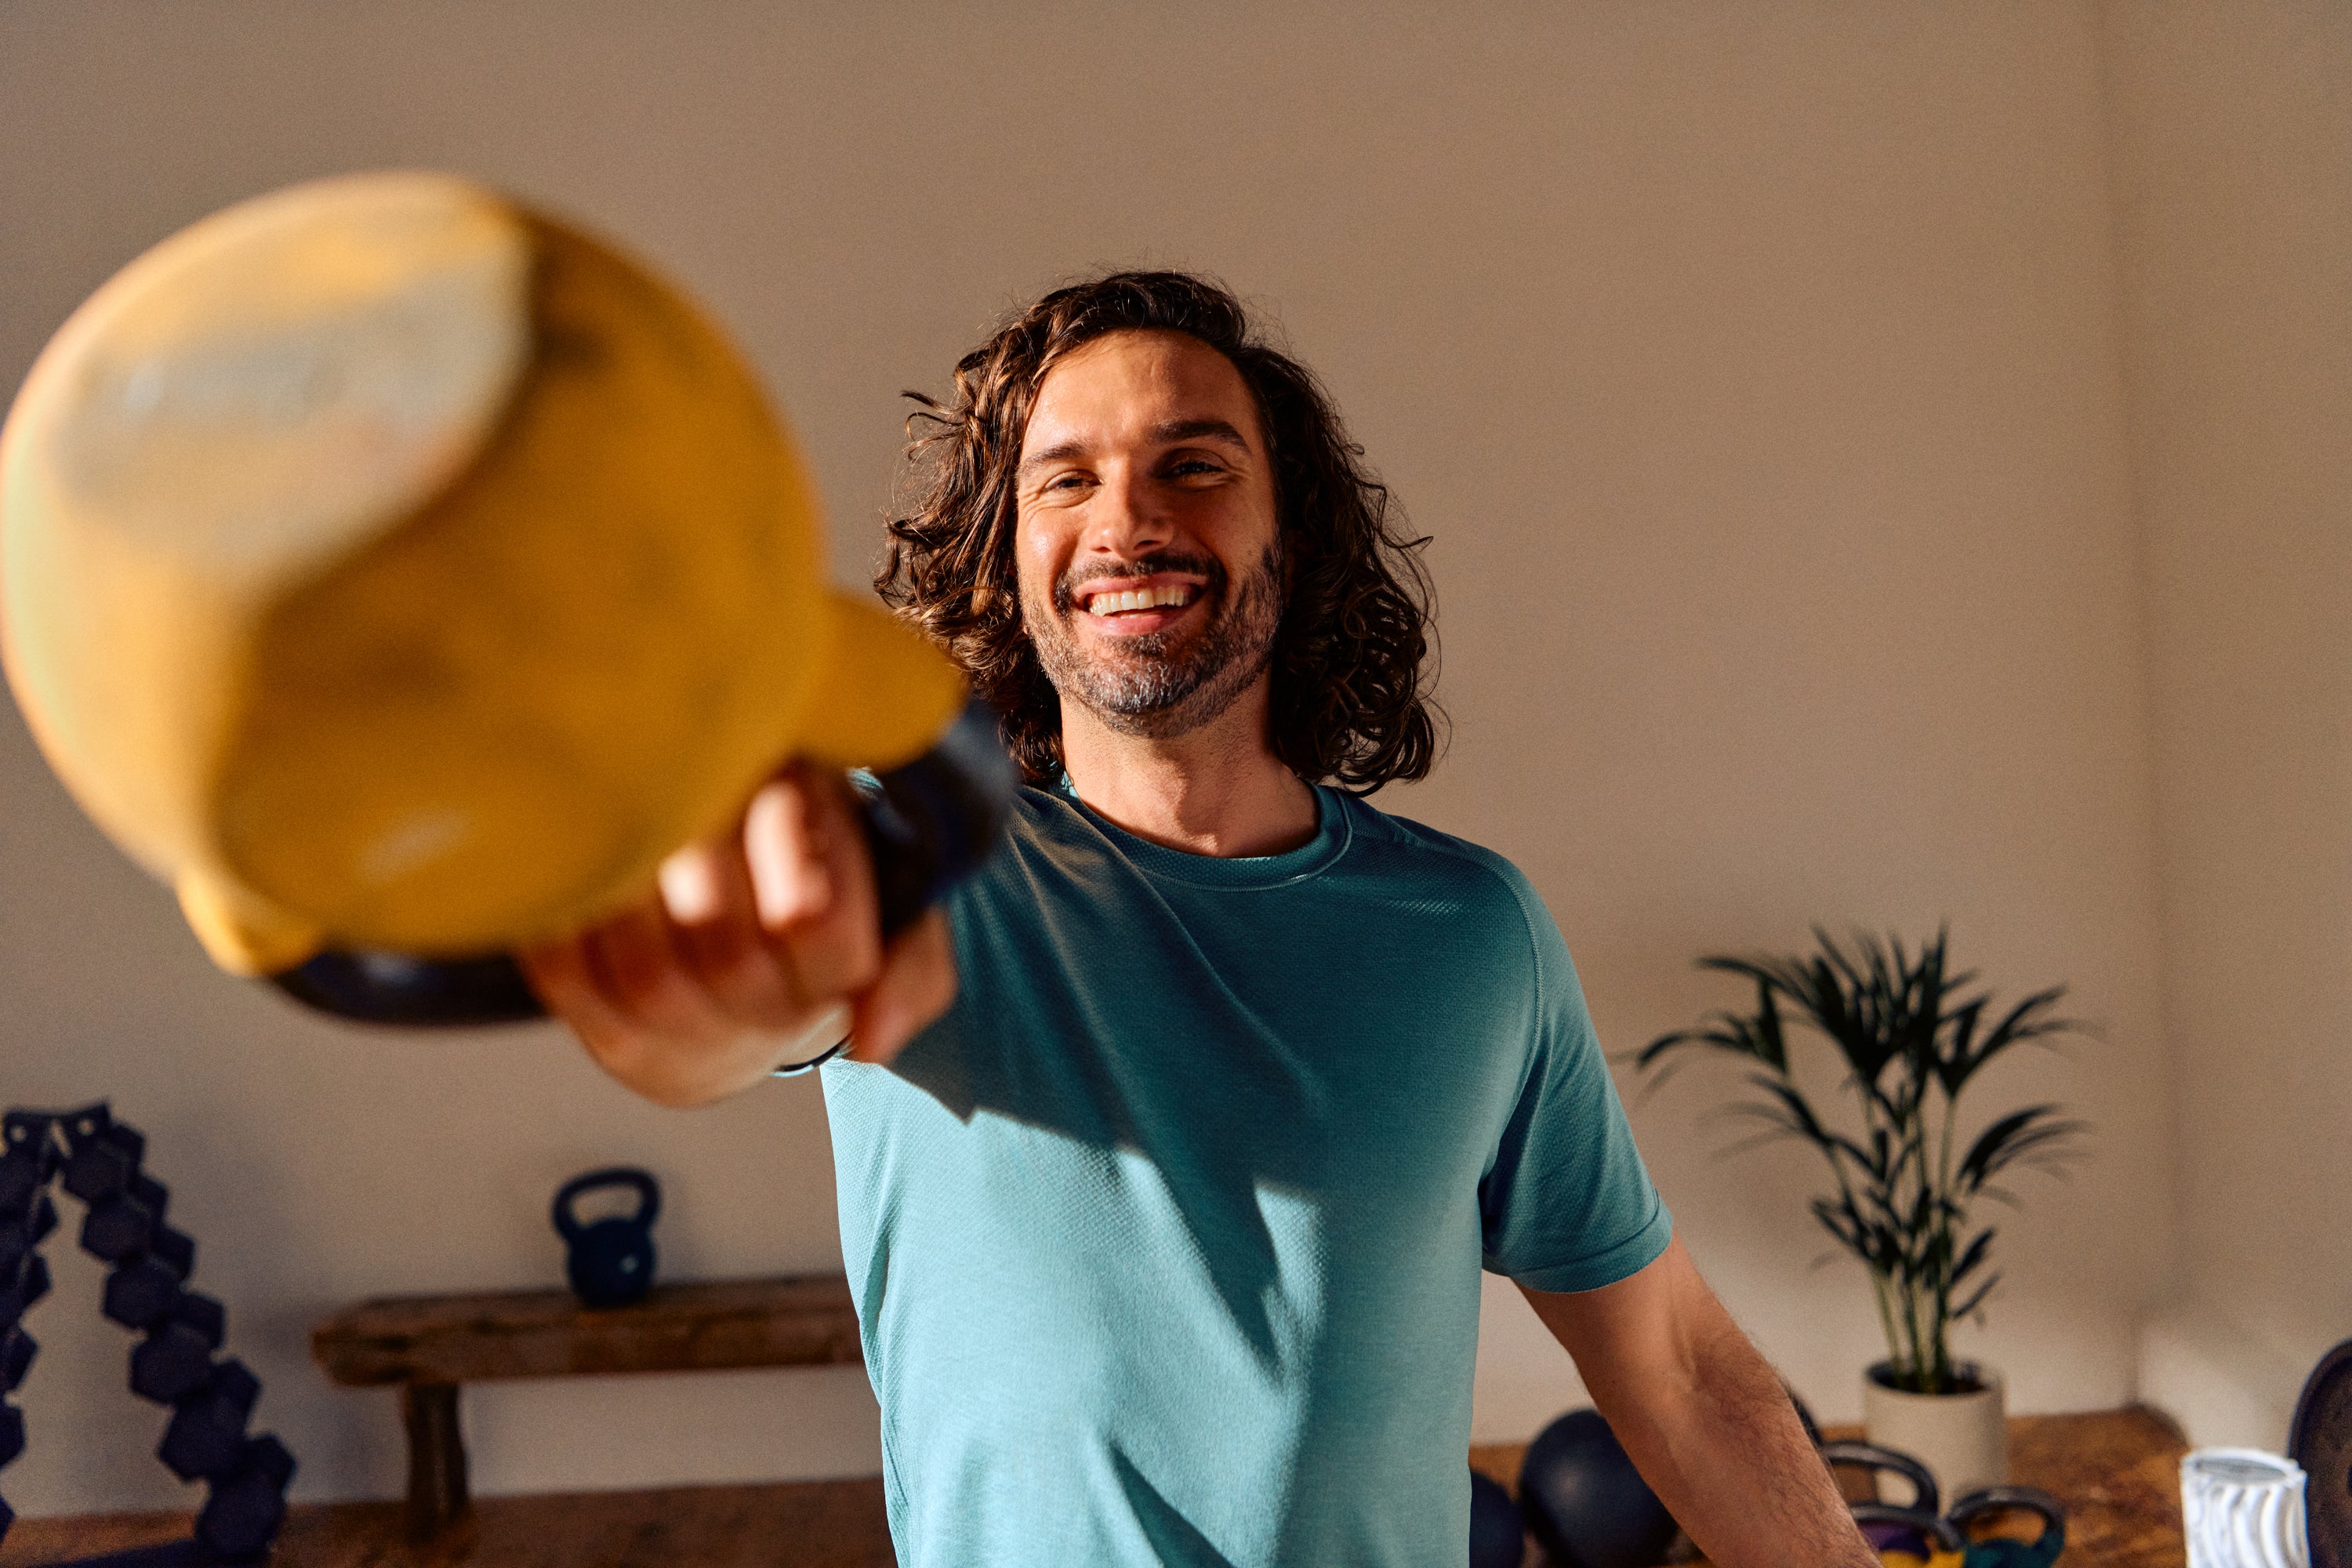 20. Moving On: Facing My Childhood with The Body Coach, Joe Wicks